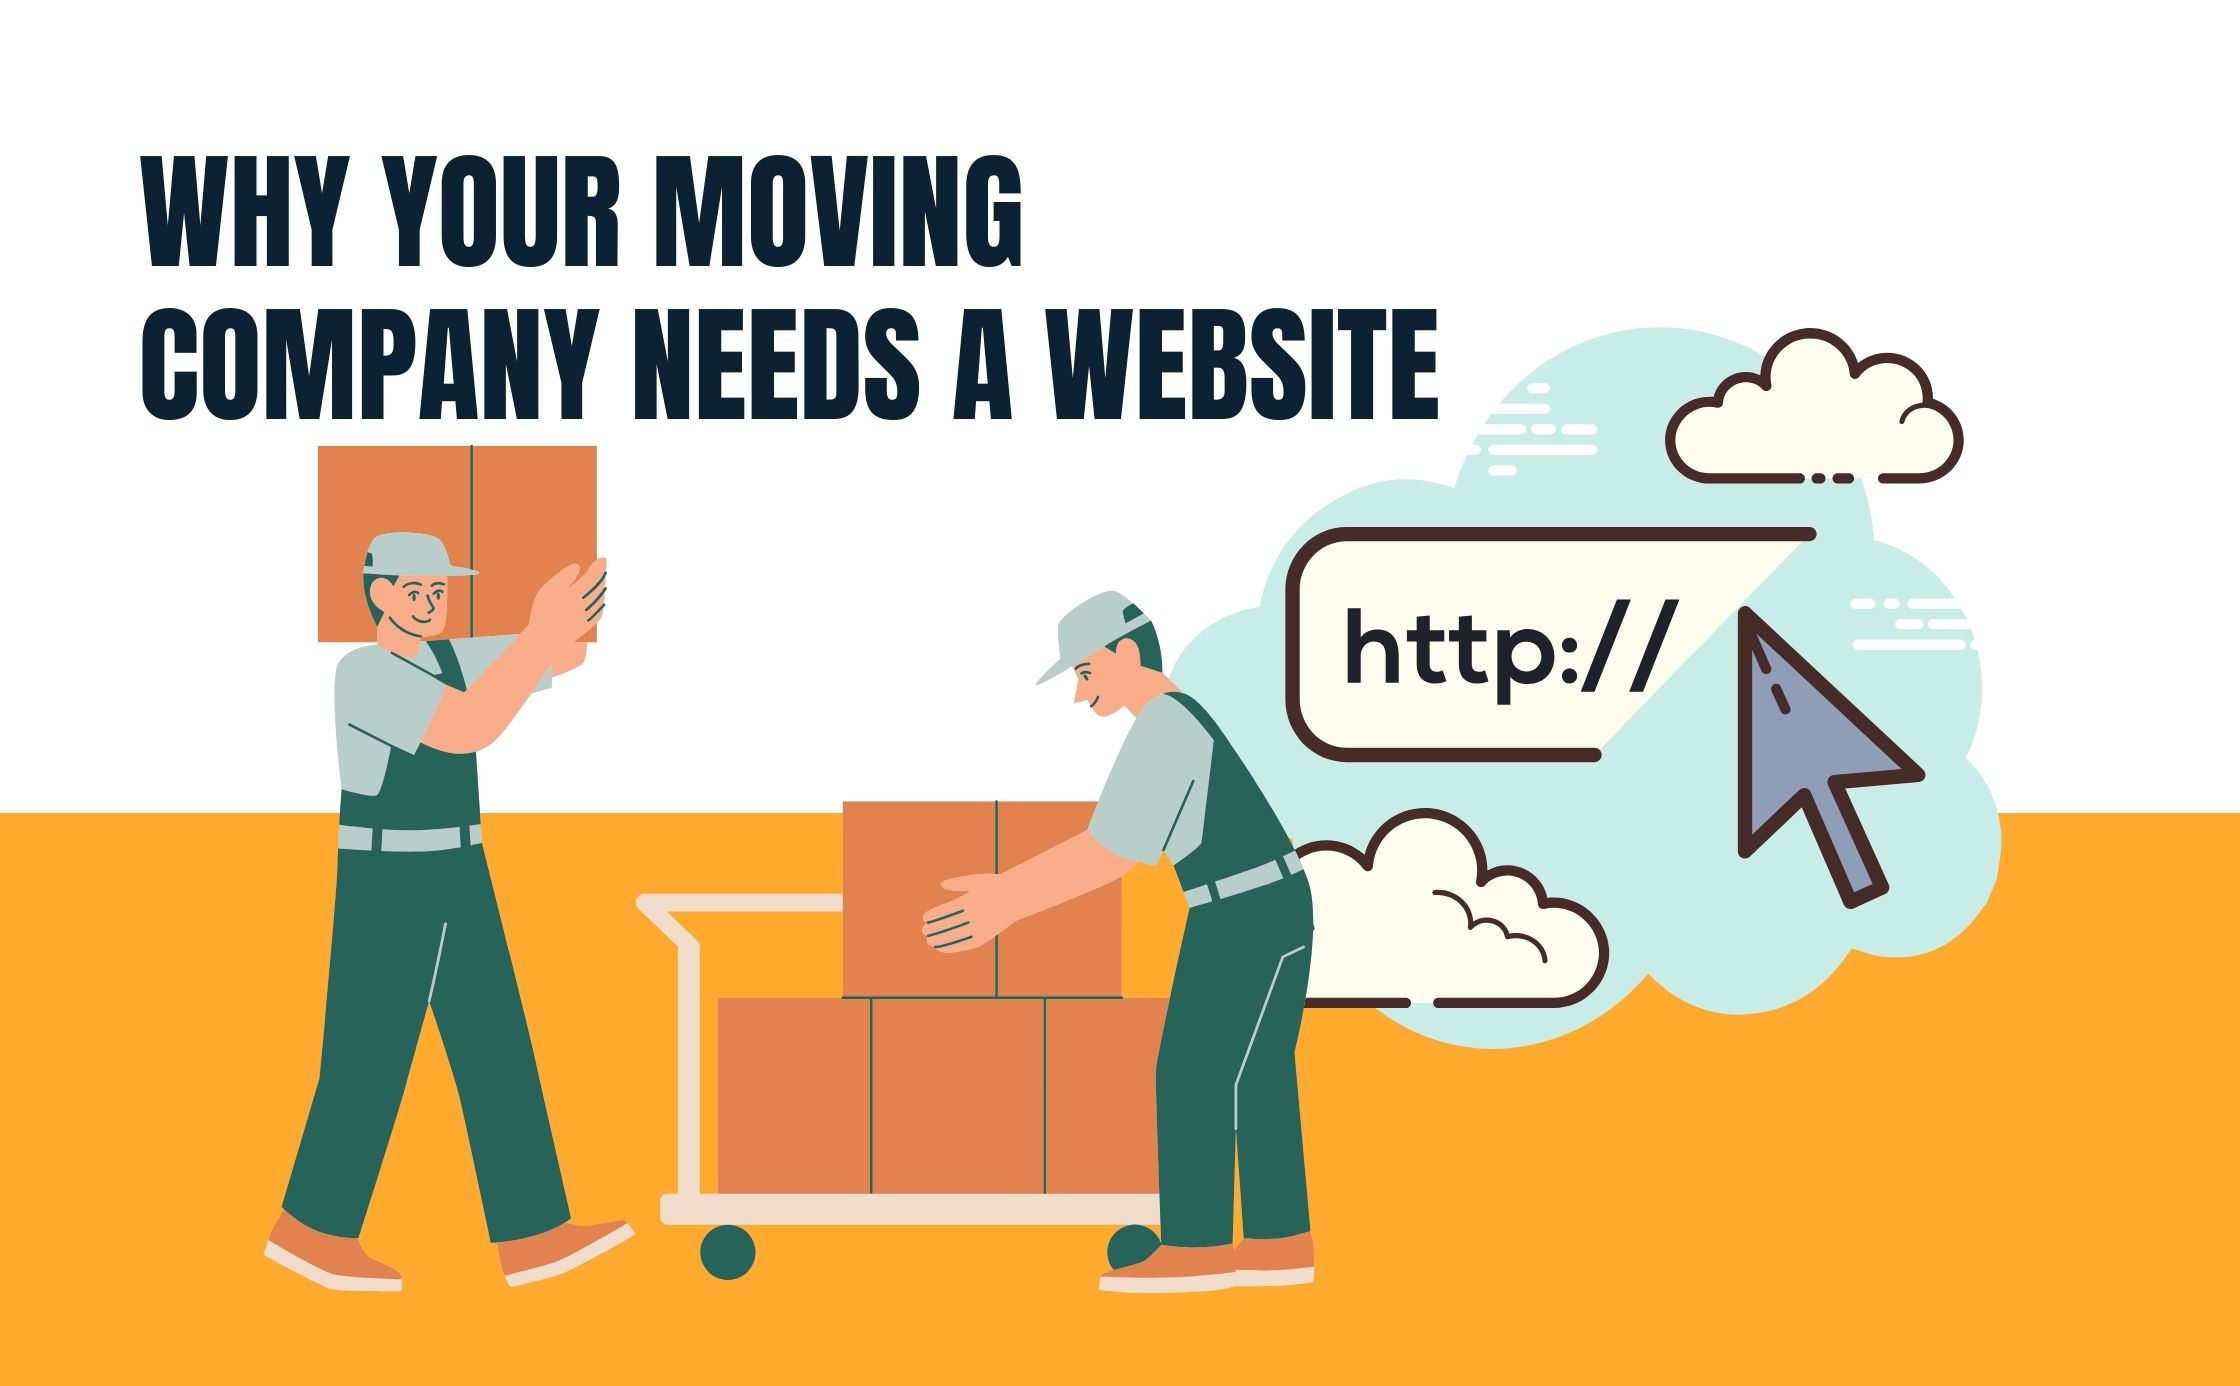 Why Your Moving Company Needs a Website